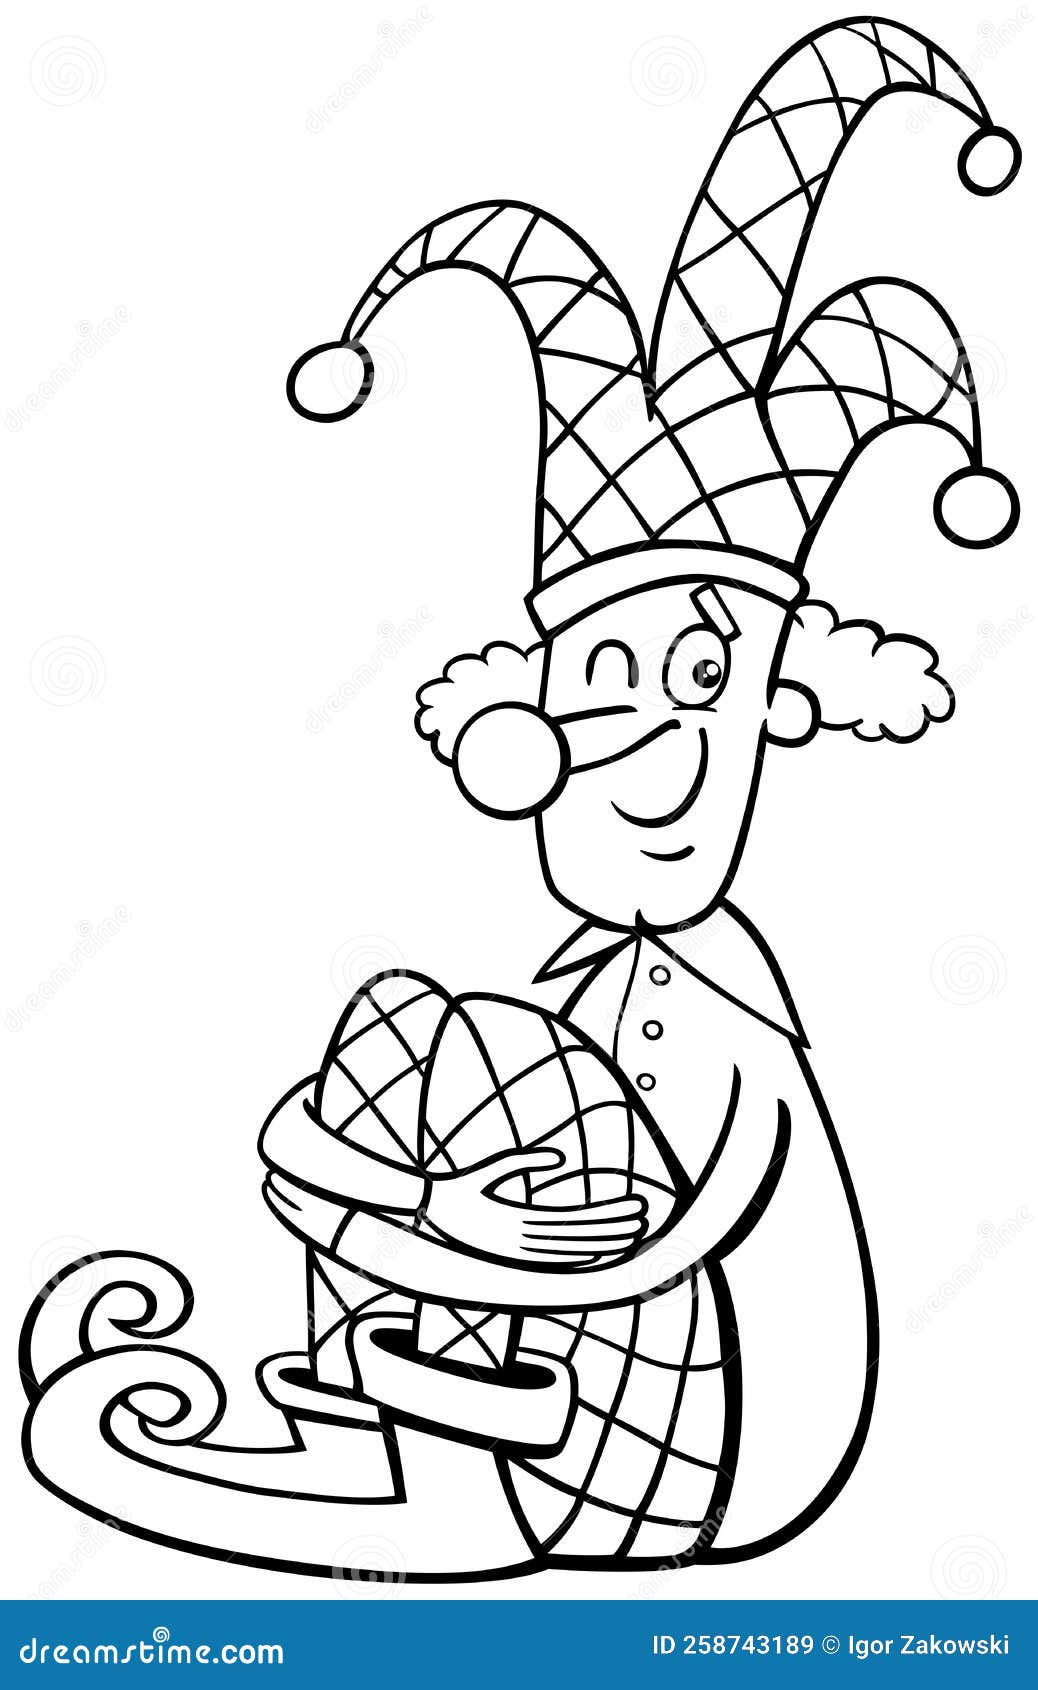 Cartoon clown or jester ic character coloring page stock vector